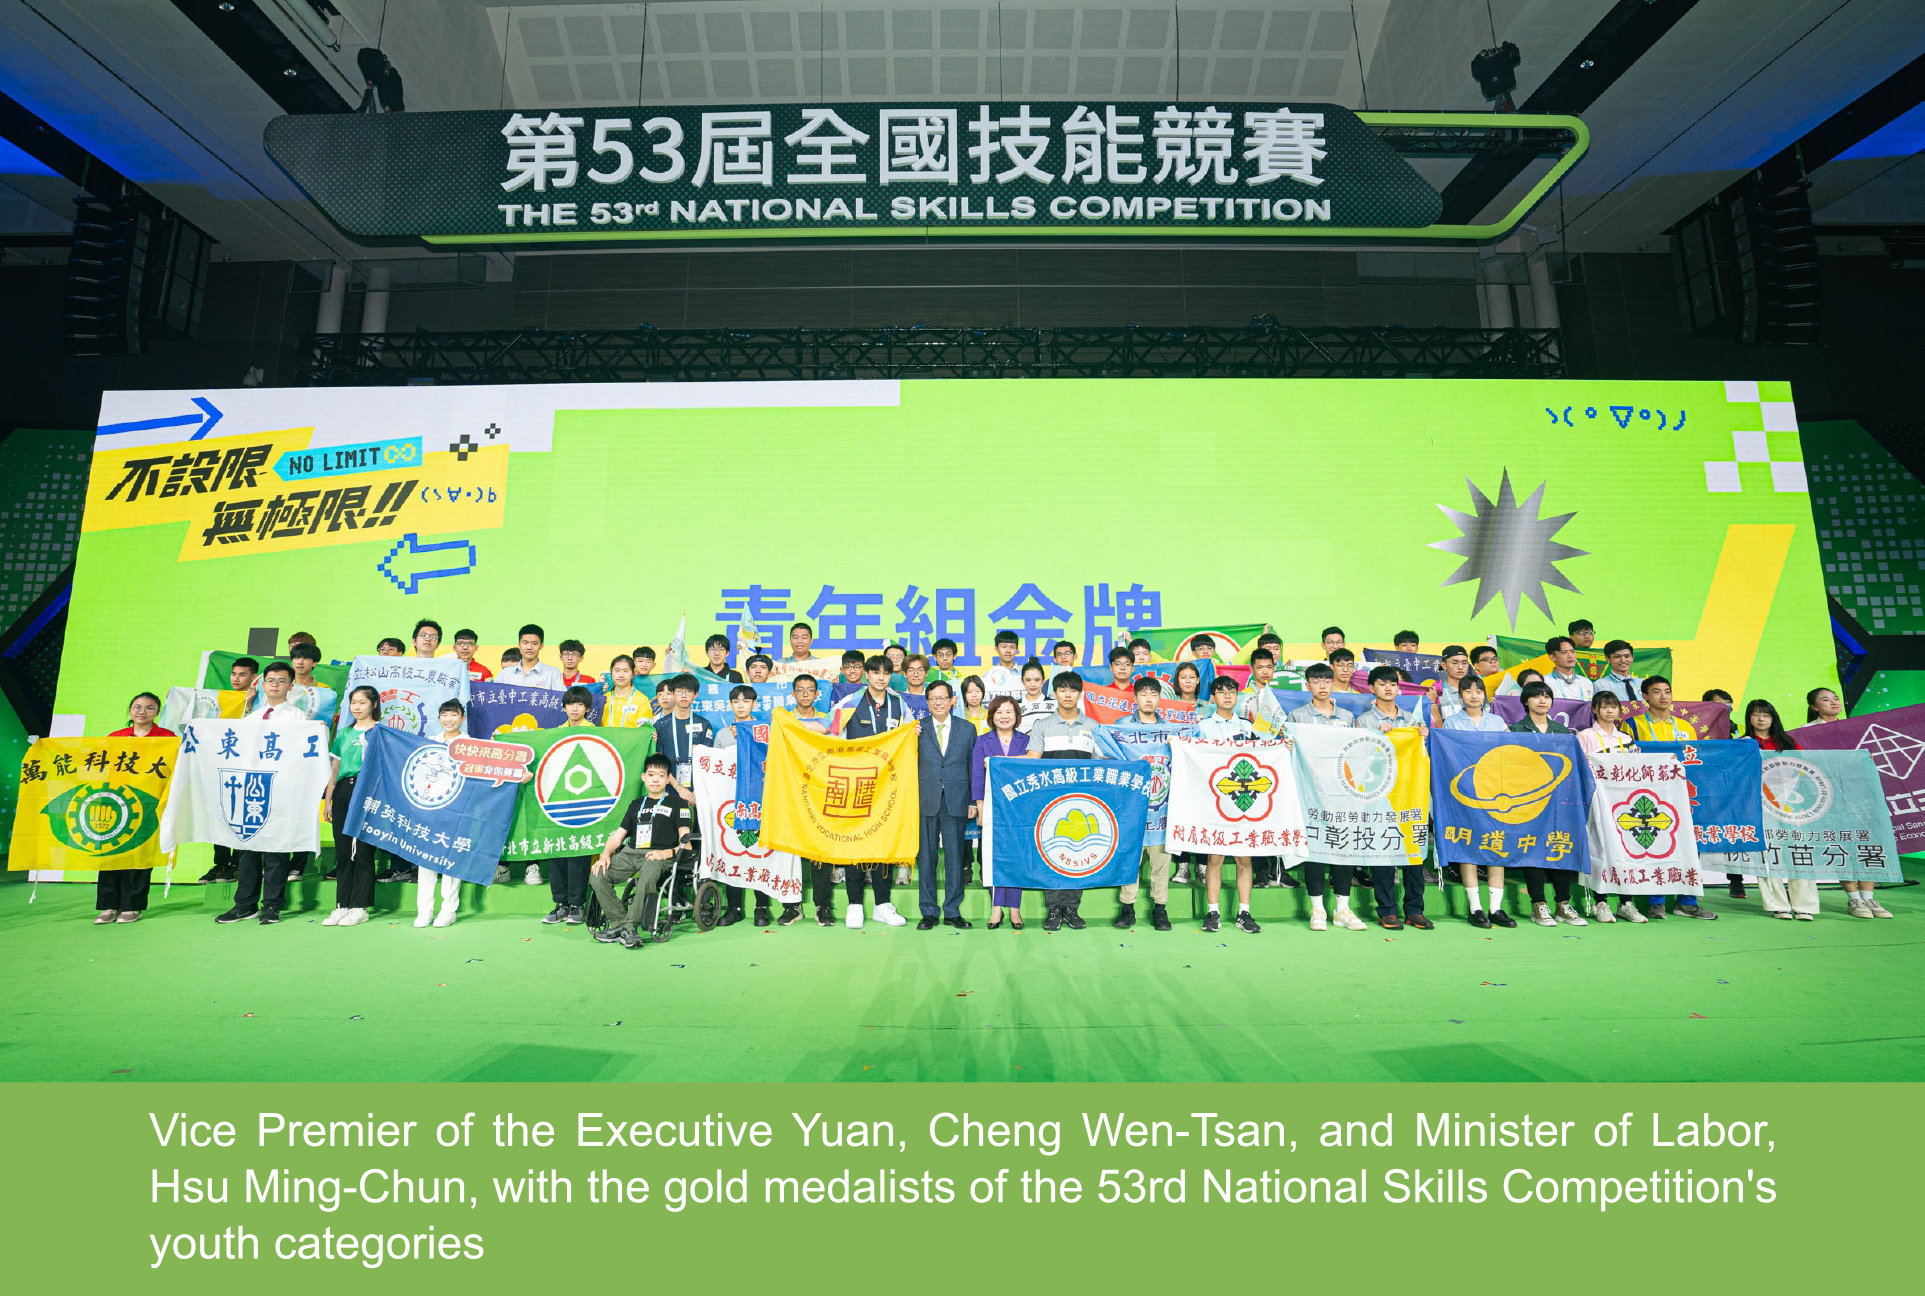 "No Limits, No Boundaries" - Results of the 53rd National Skills Competition Announced.Vice Premier Cheng Wen-Tsan Attends the Closing Awards Ceremony